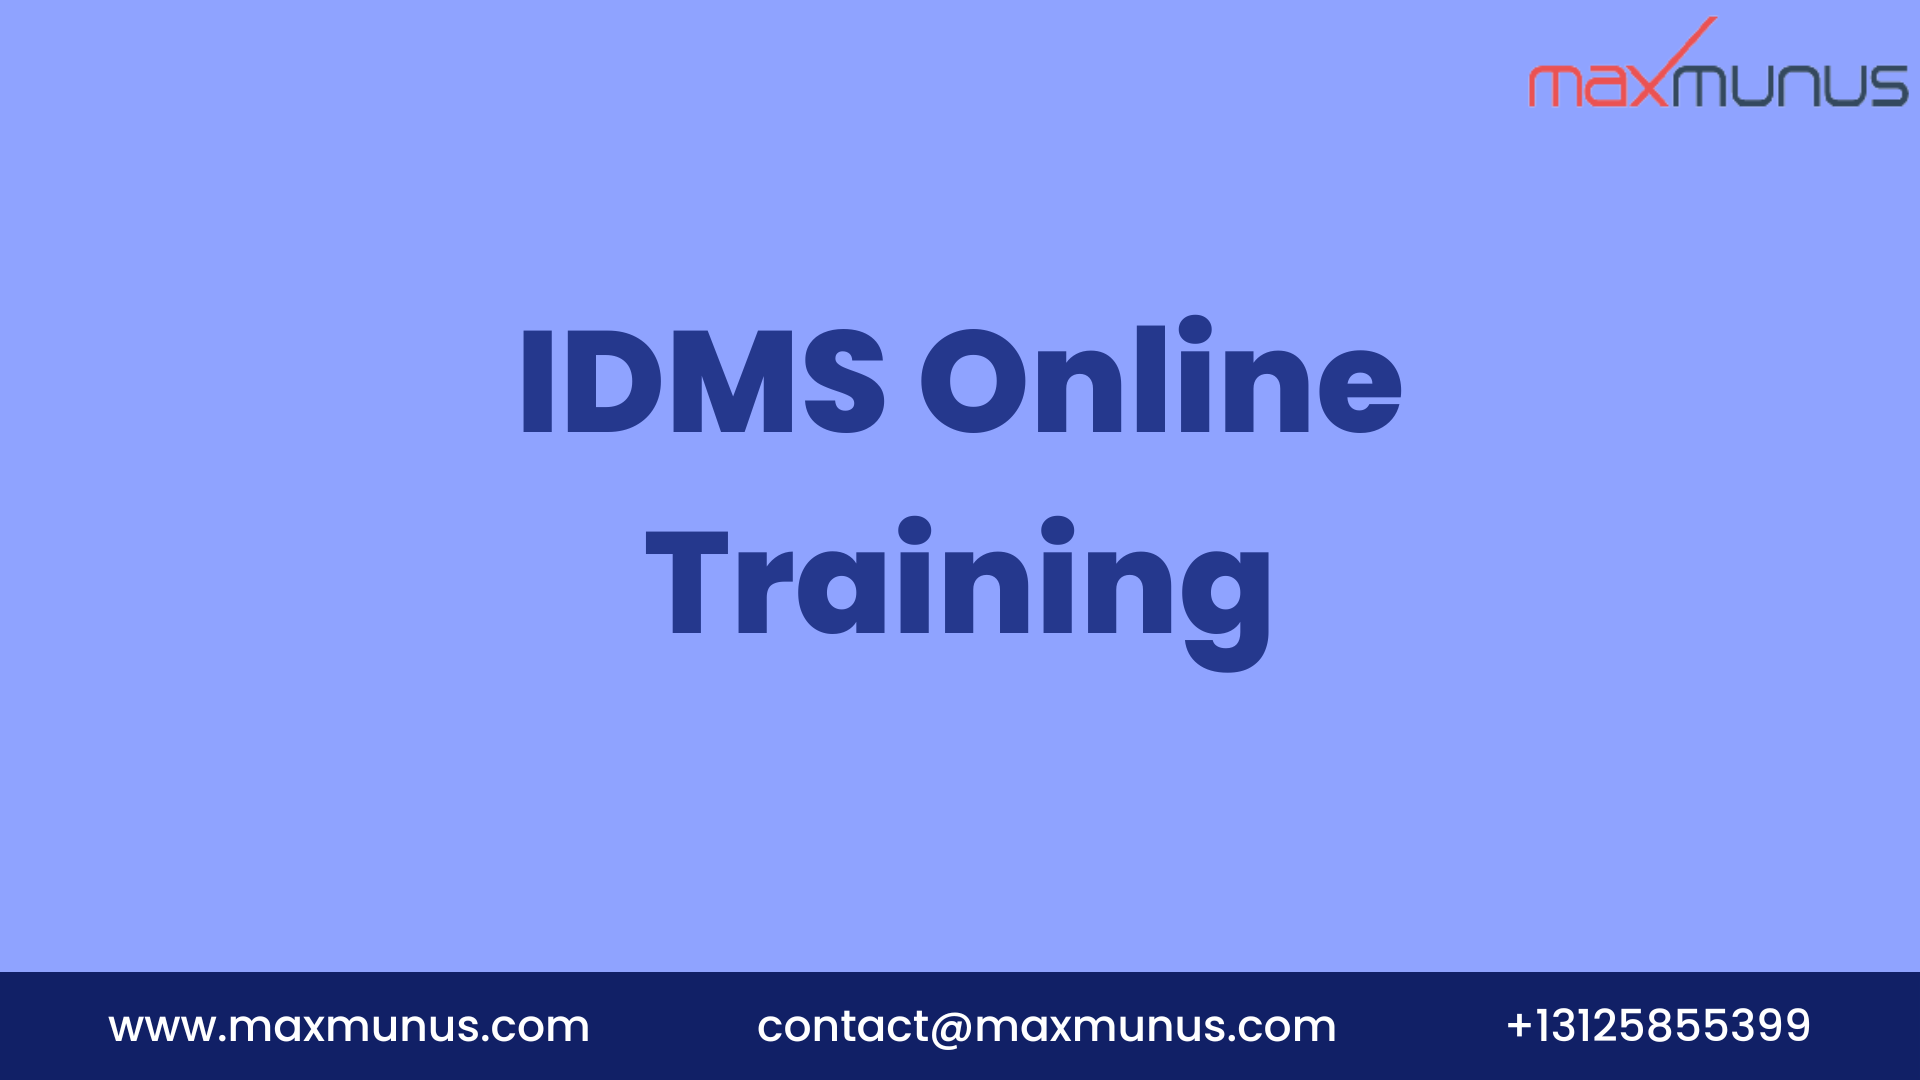 What are the key features of a good IDMS training program? | TechPlanet